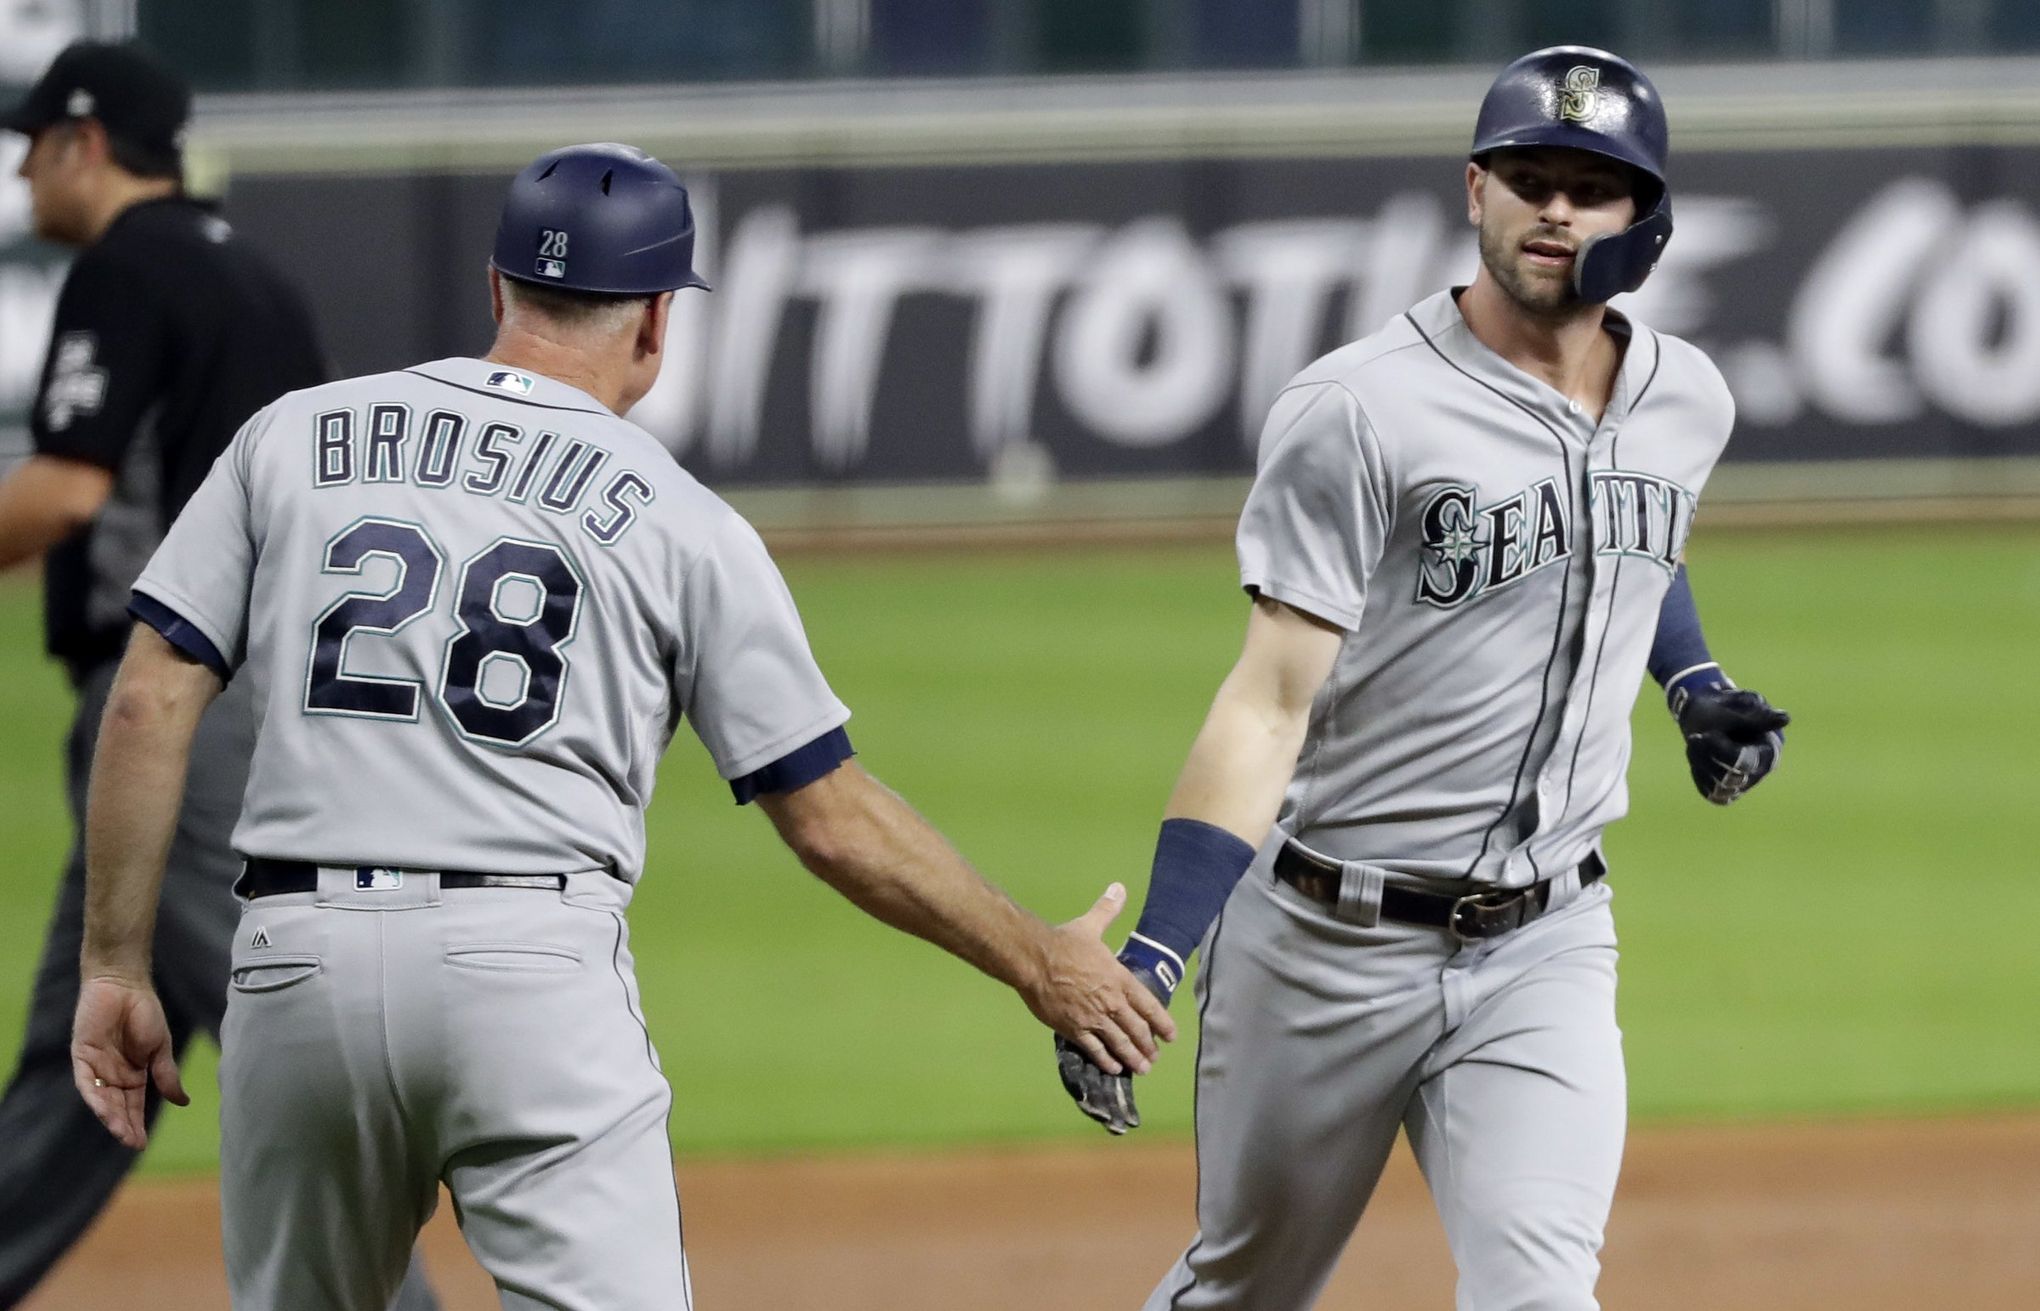 Seattle Mariners: 2018 Player review - outfielder Mitch Haniger